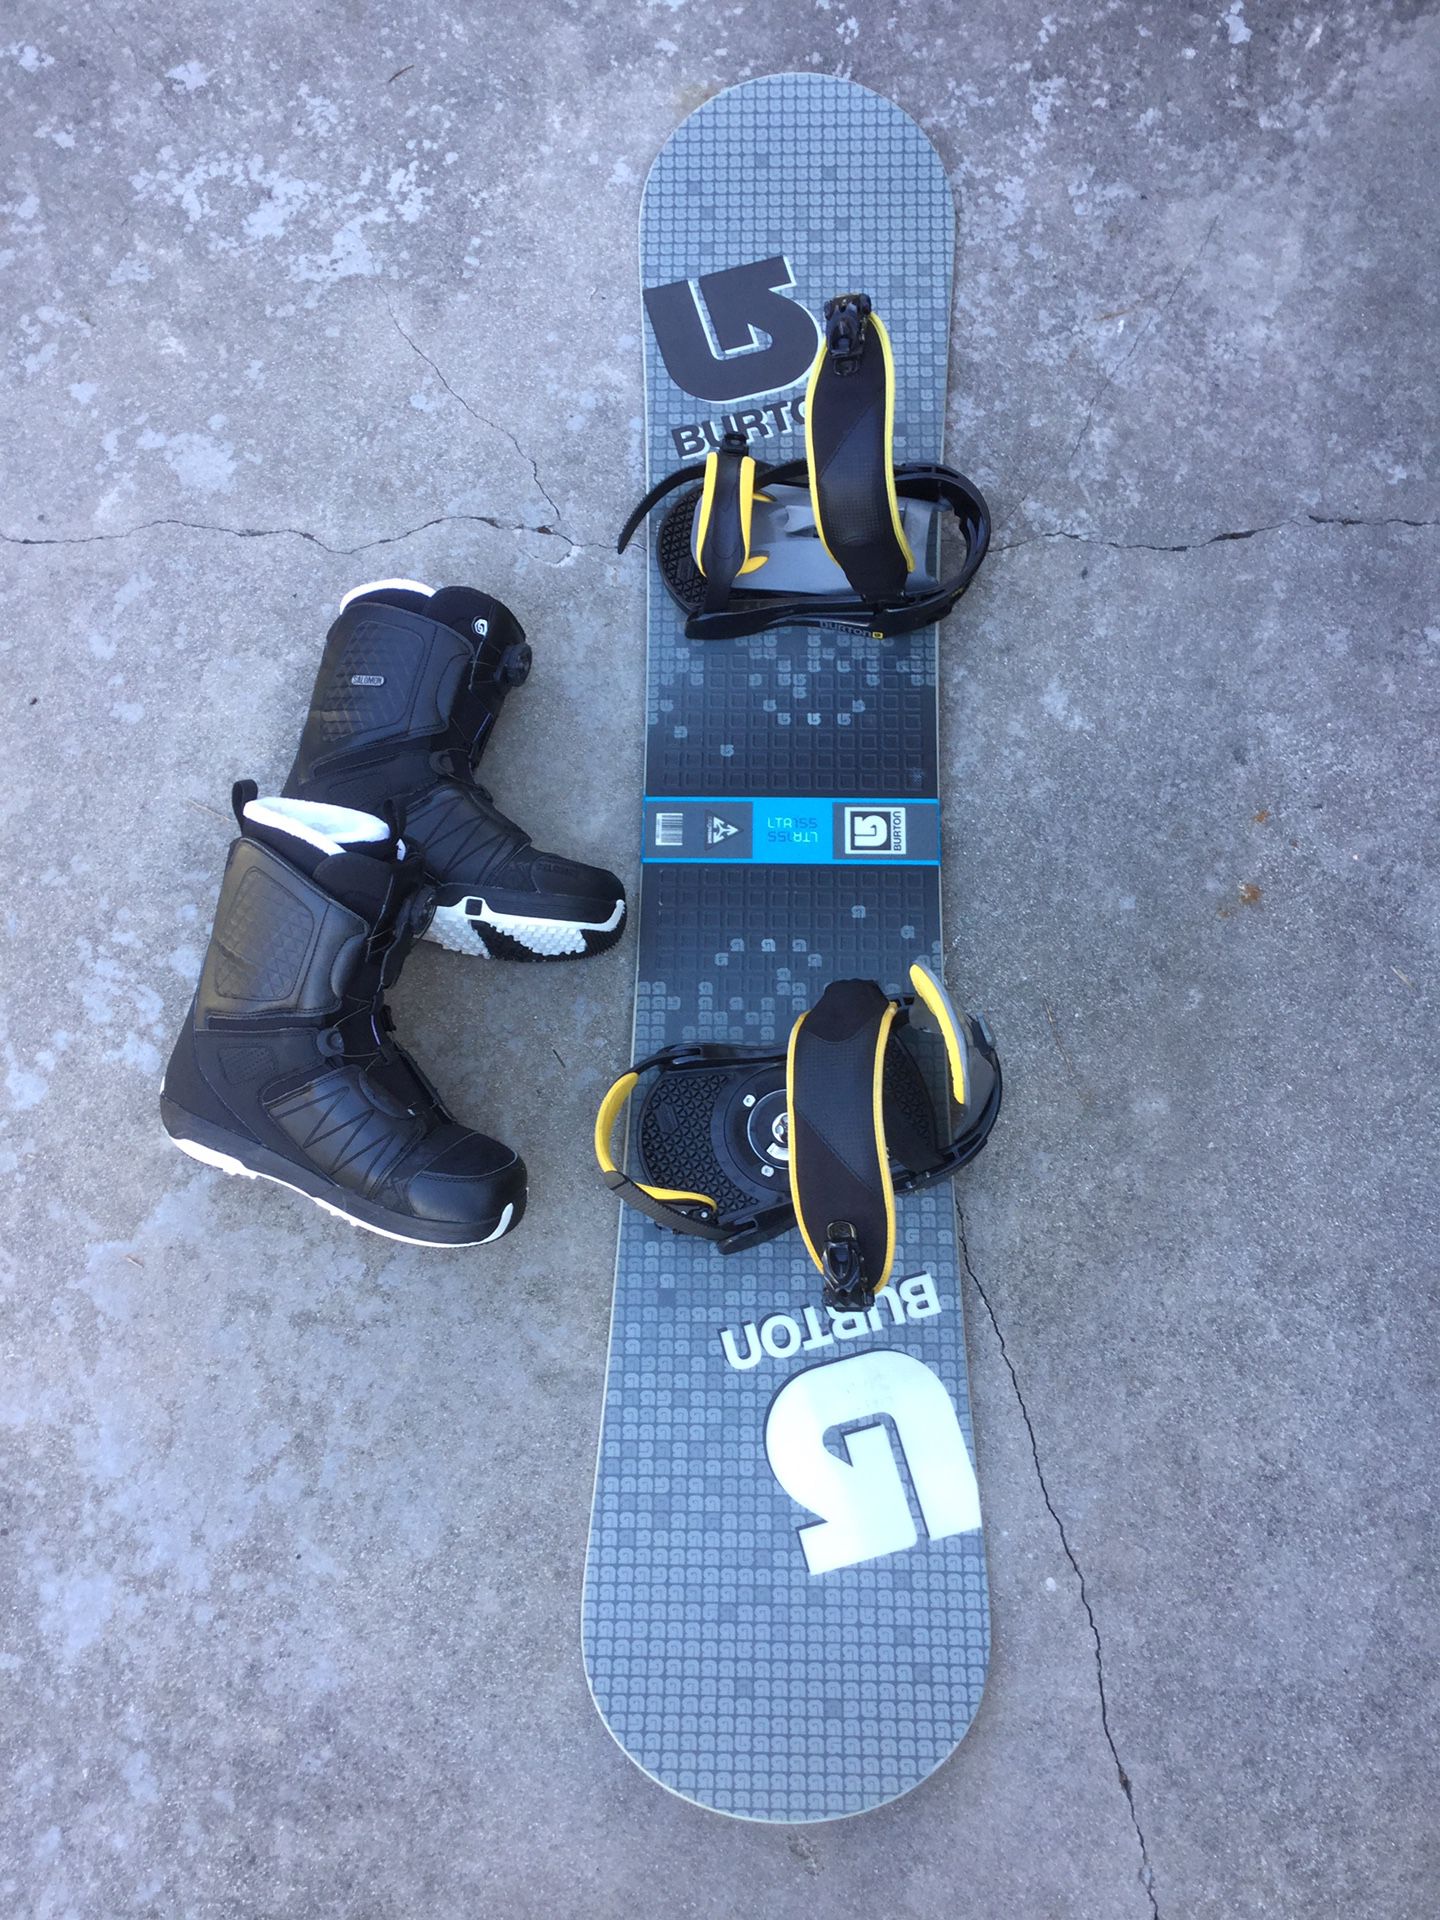 Burton LTR155 Snowboard with Burton bindings and Salomon Faction BOA size 9 boots and carry bag